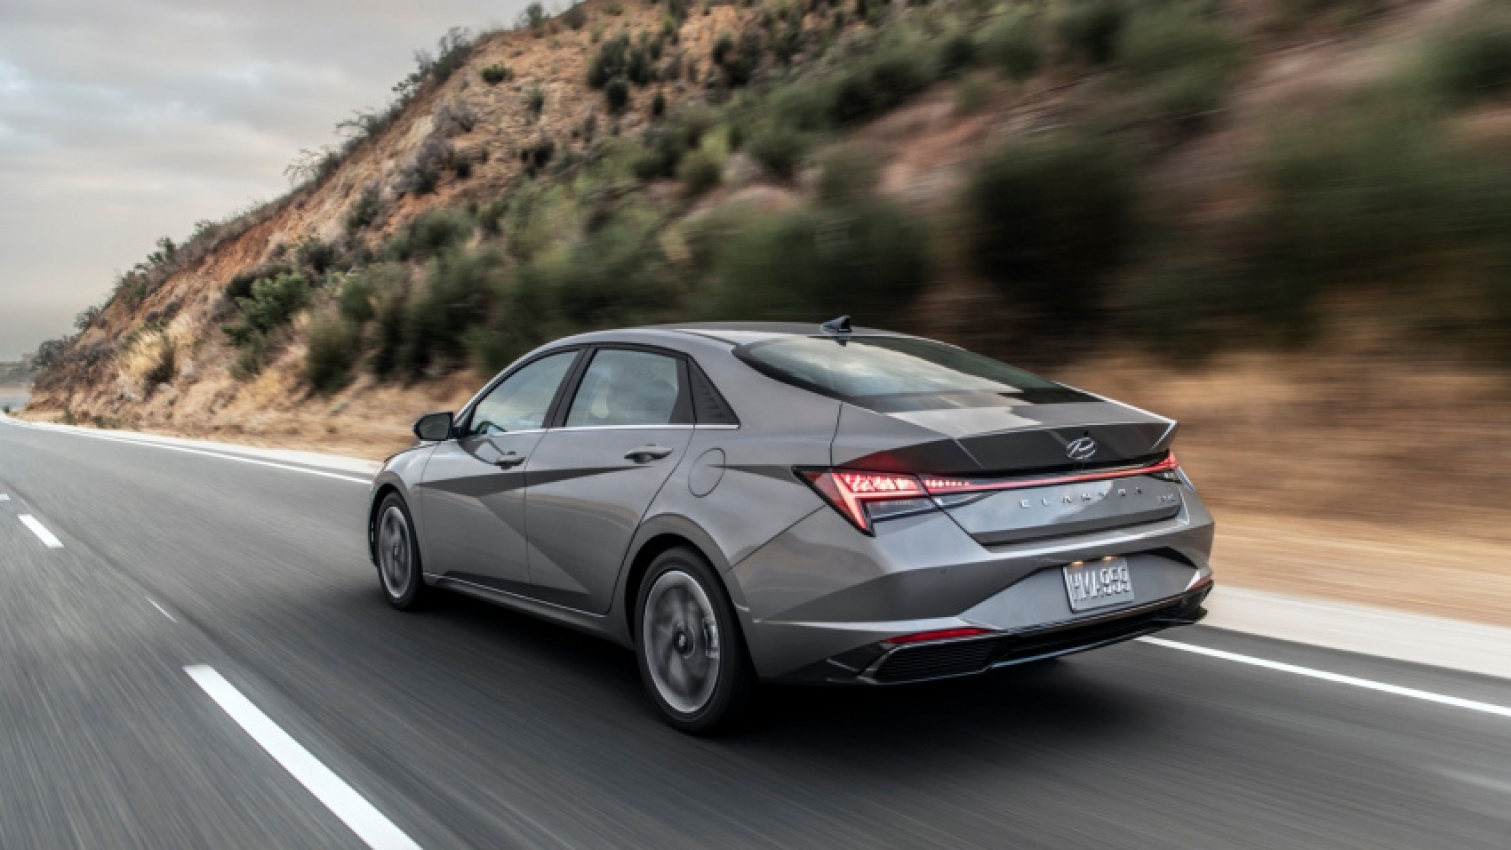 autos, cars, hyundai, android, first drives, hybrids, hyundai elantra, hyundai elantra news, hyundai news, android, first drive review: 2021 hyundai elantra hybrid is a 54-mpg tech and value standout